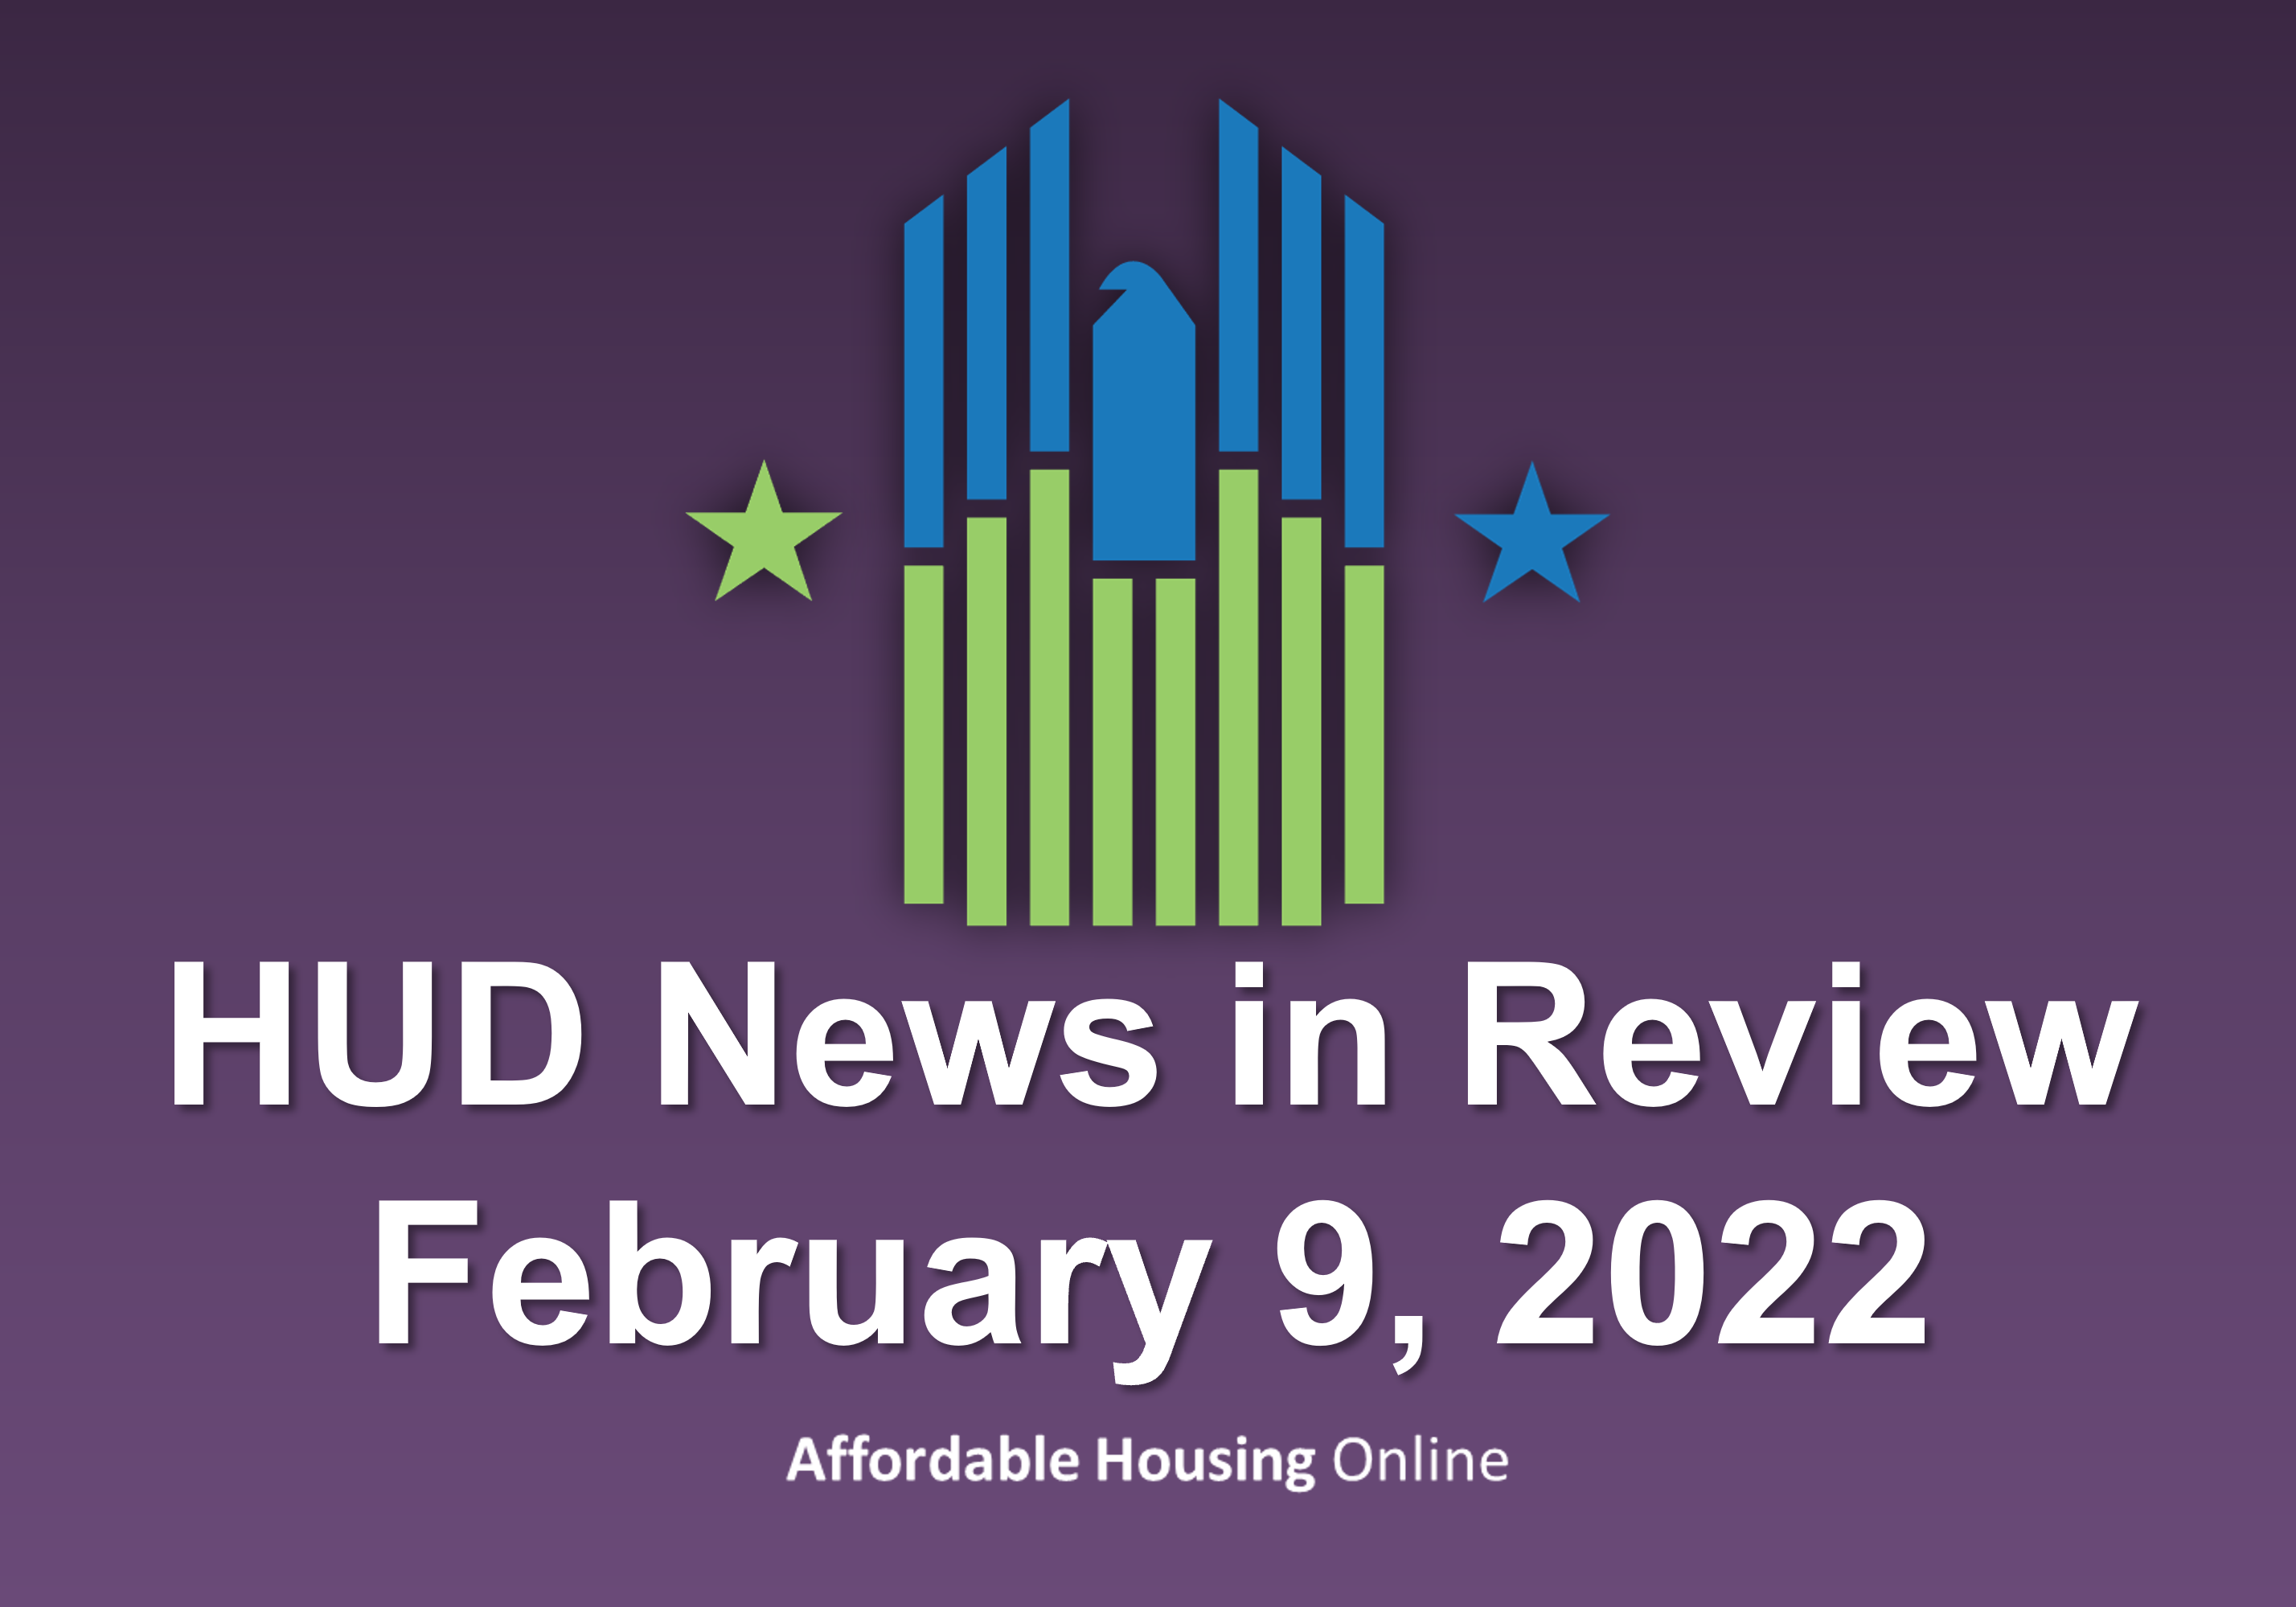 HUD News in Review banner image for February 9, 2022